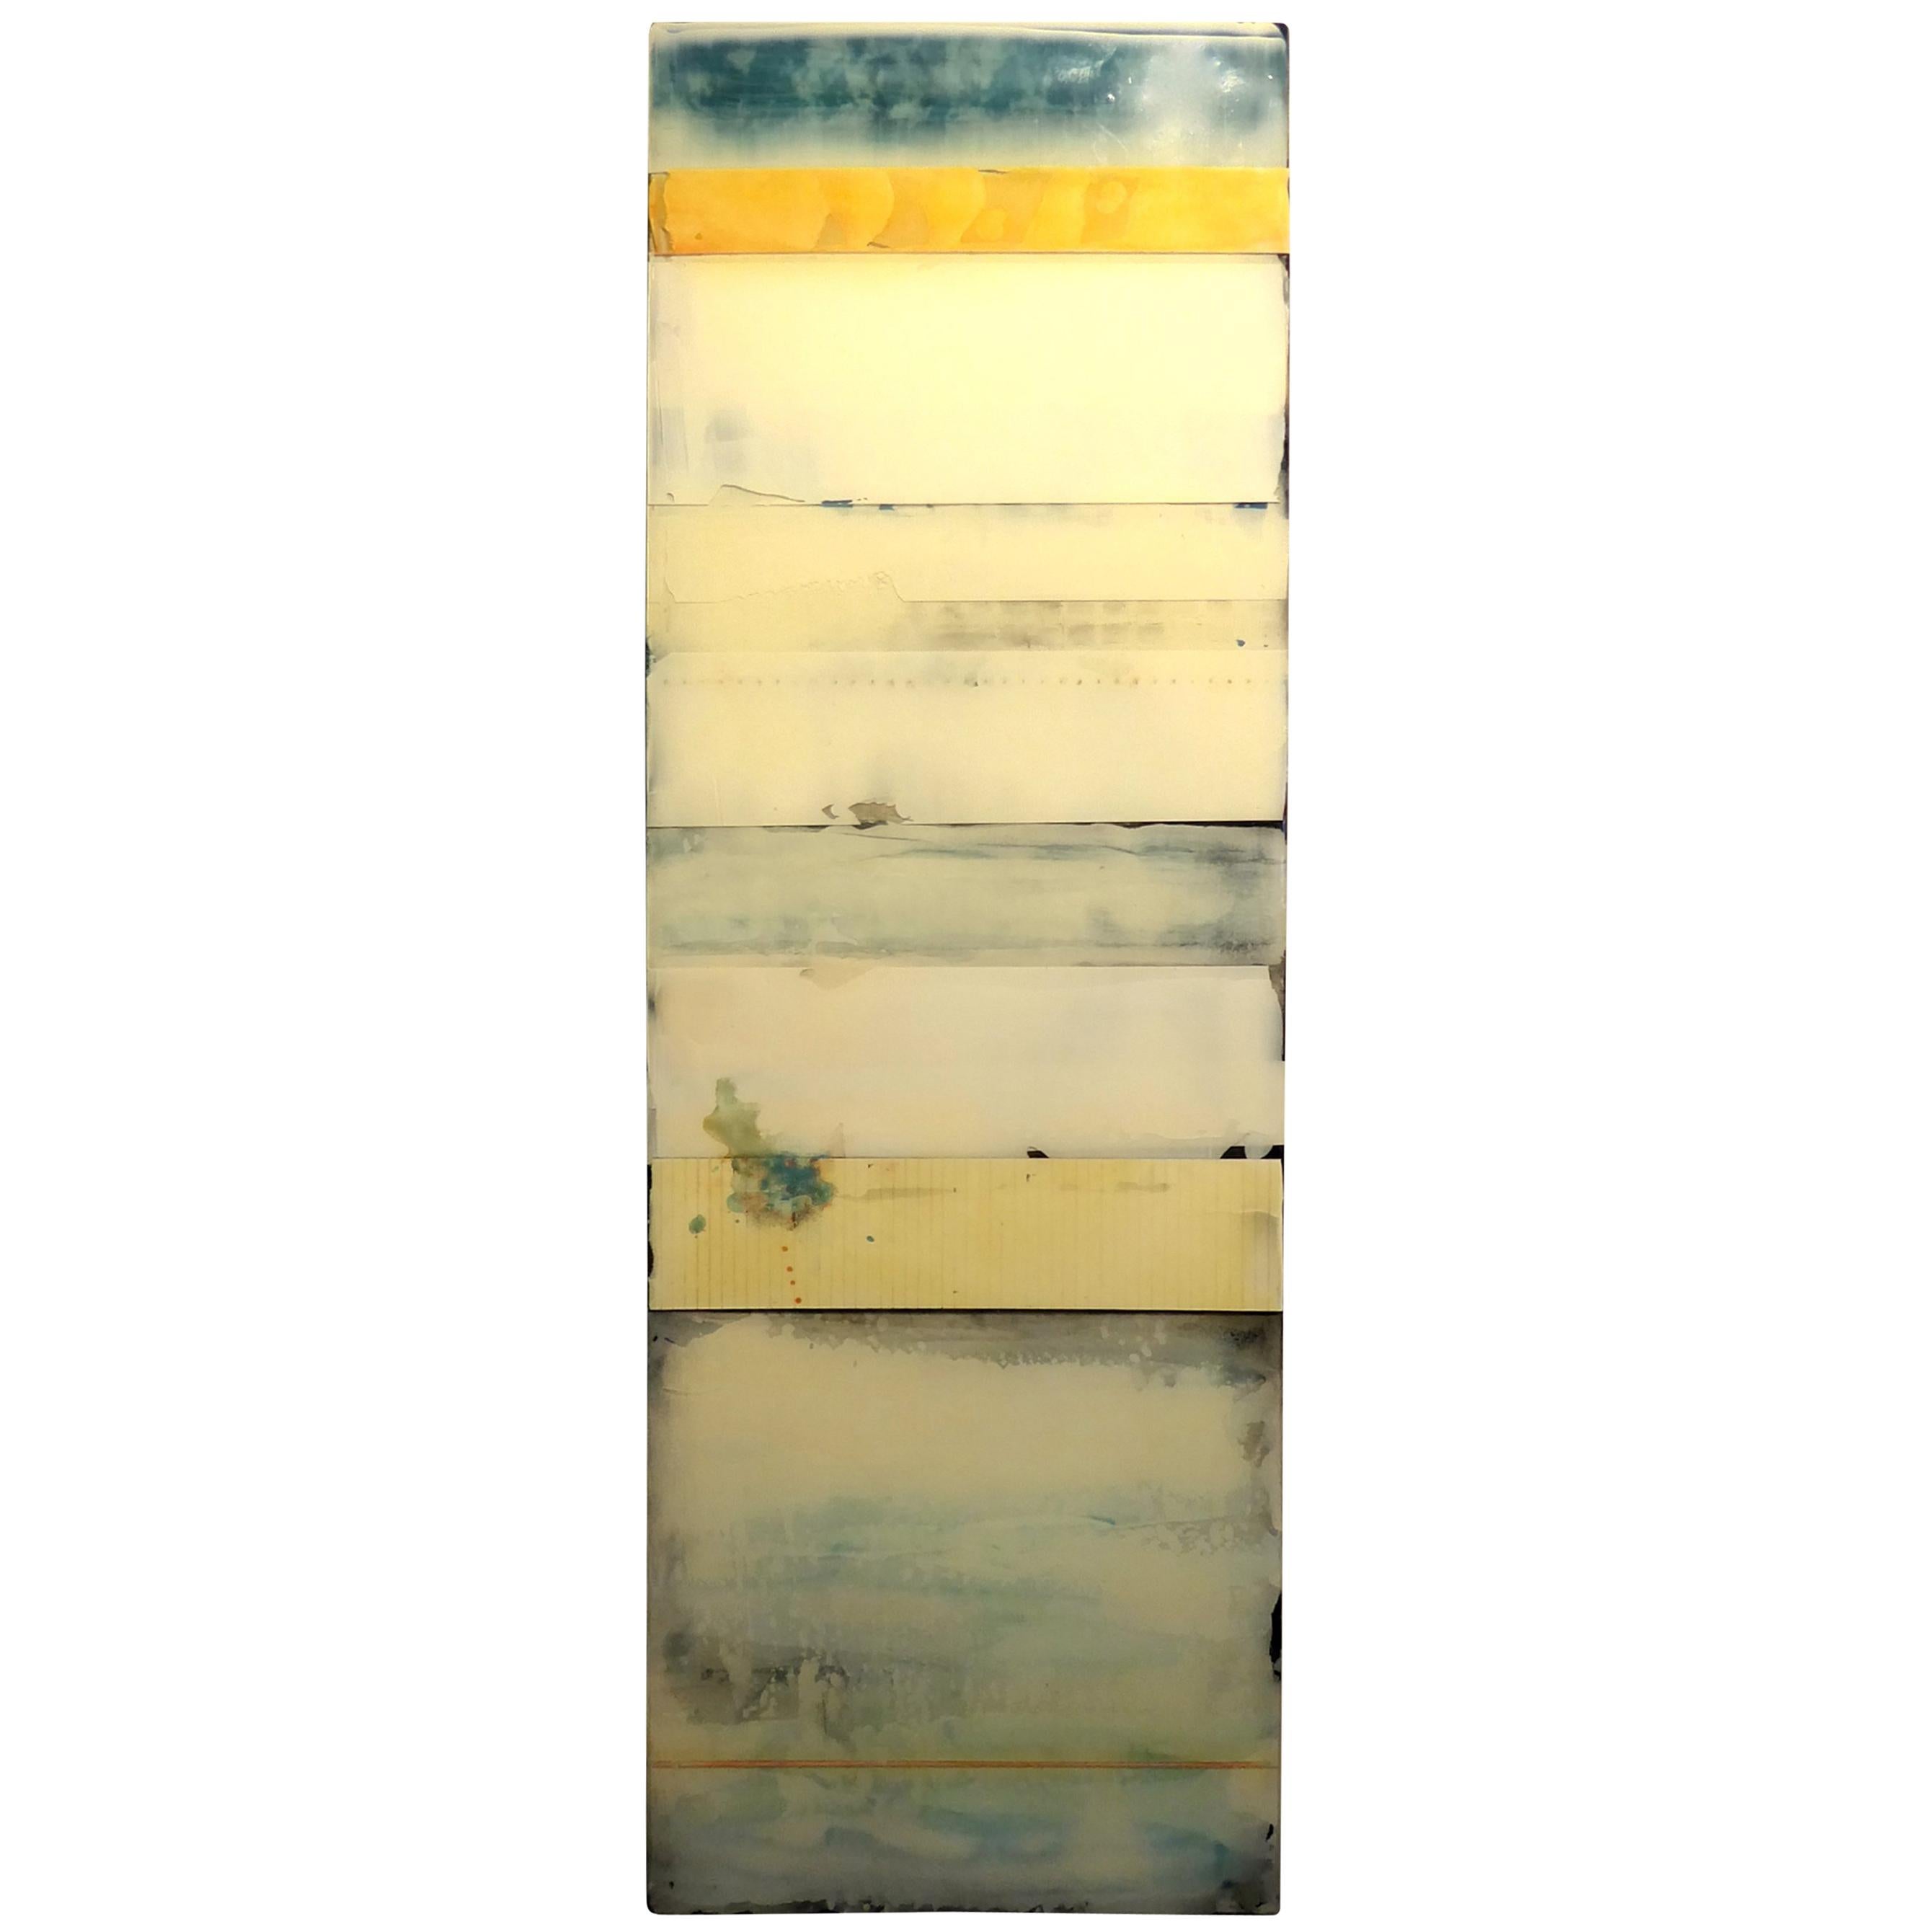 "Urban 12" a Contemporary Poured Resin Painting by American Artist Ken Sloan